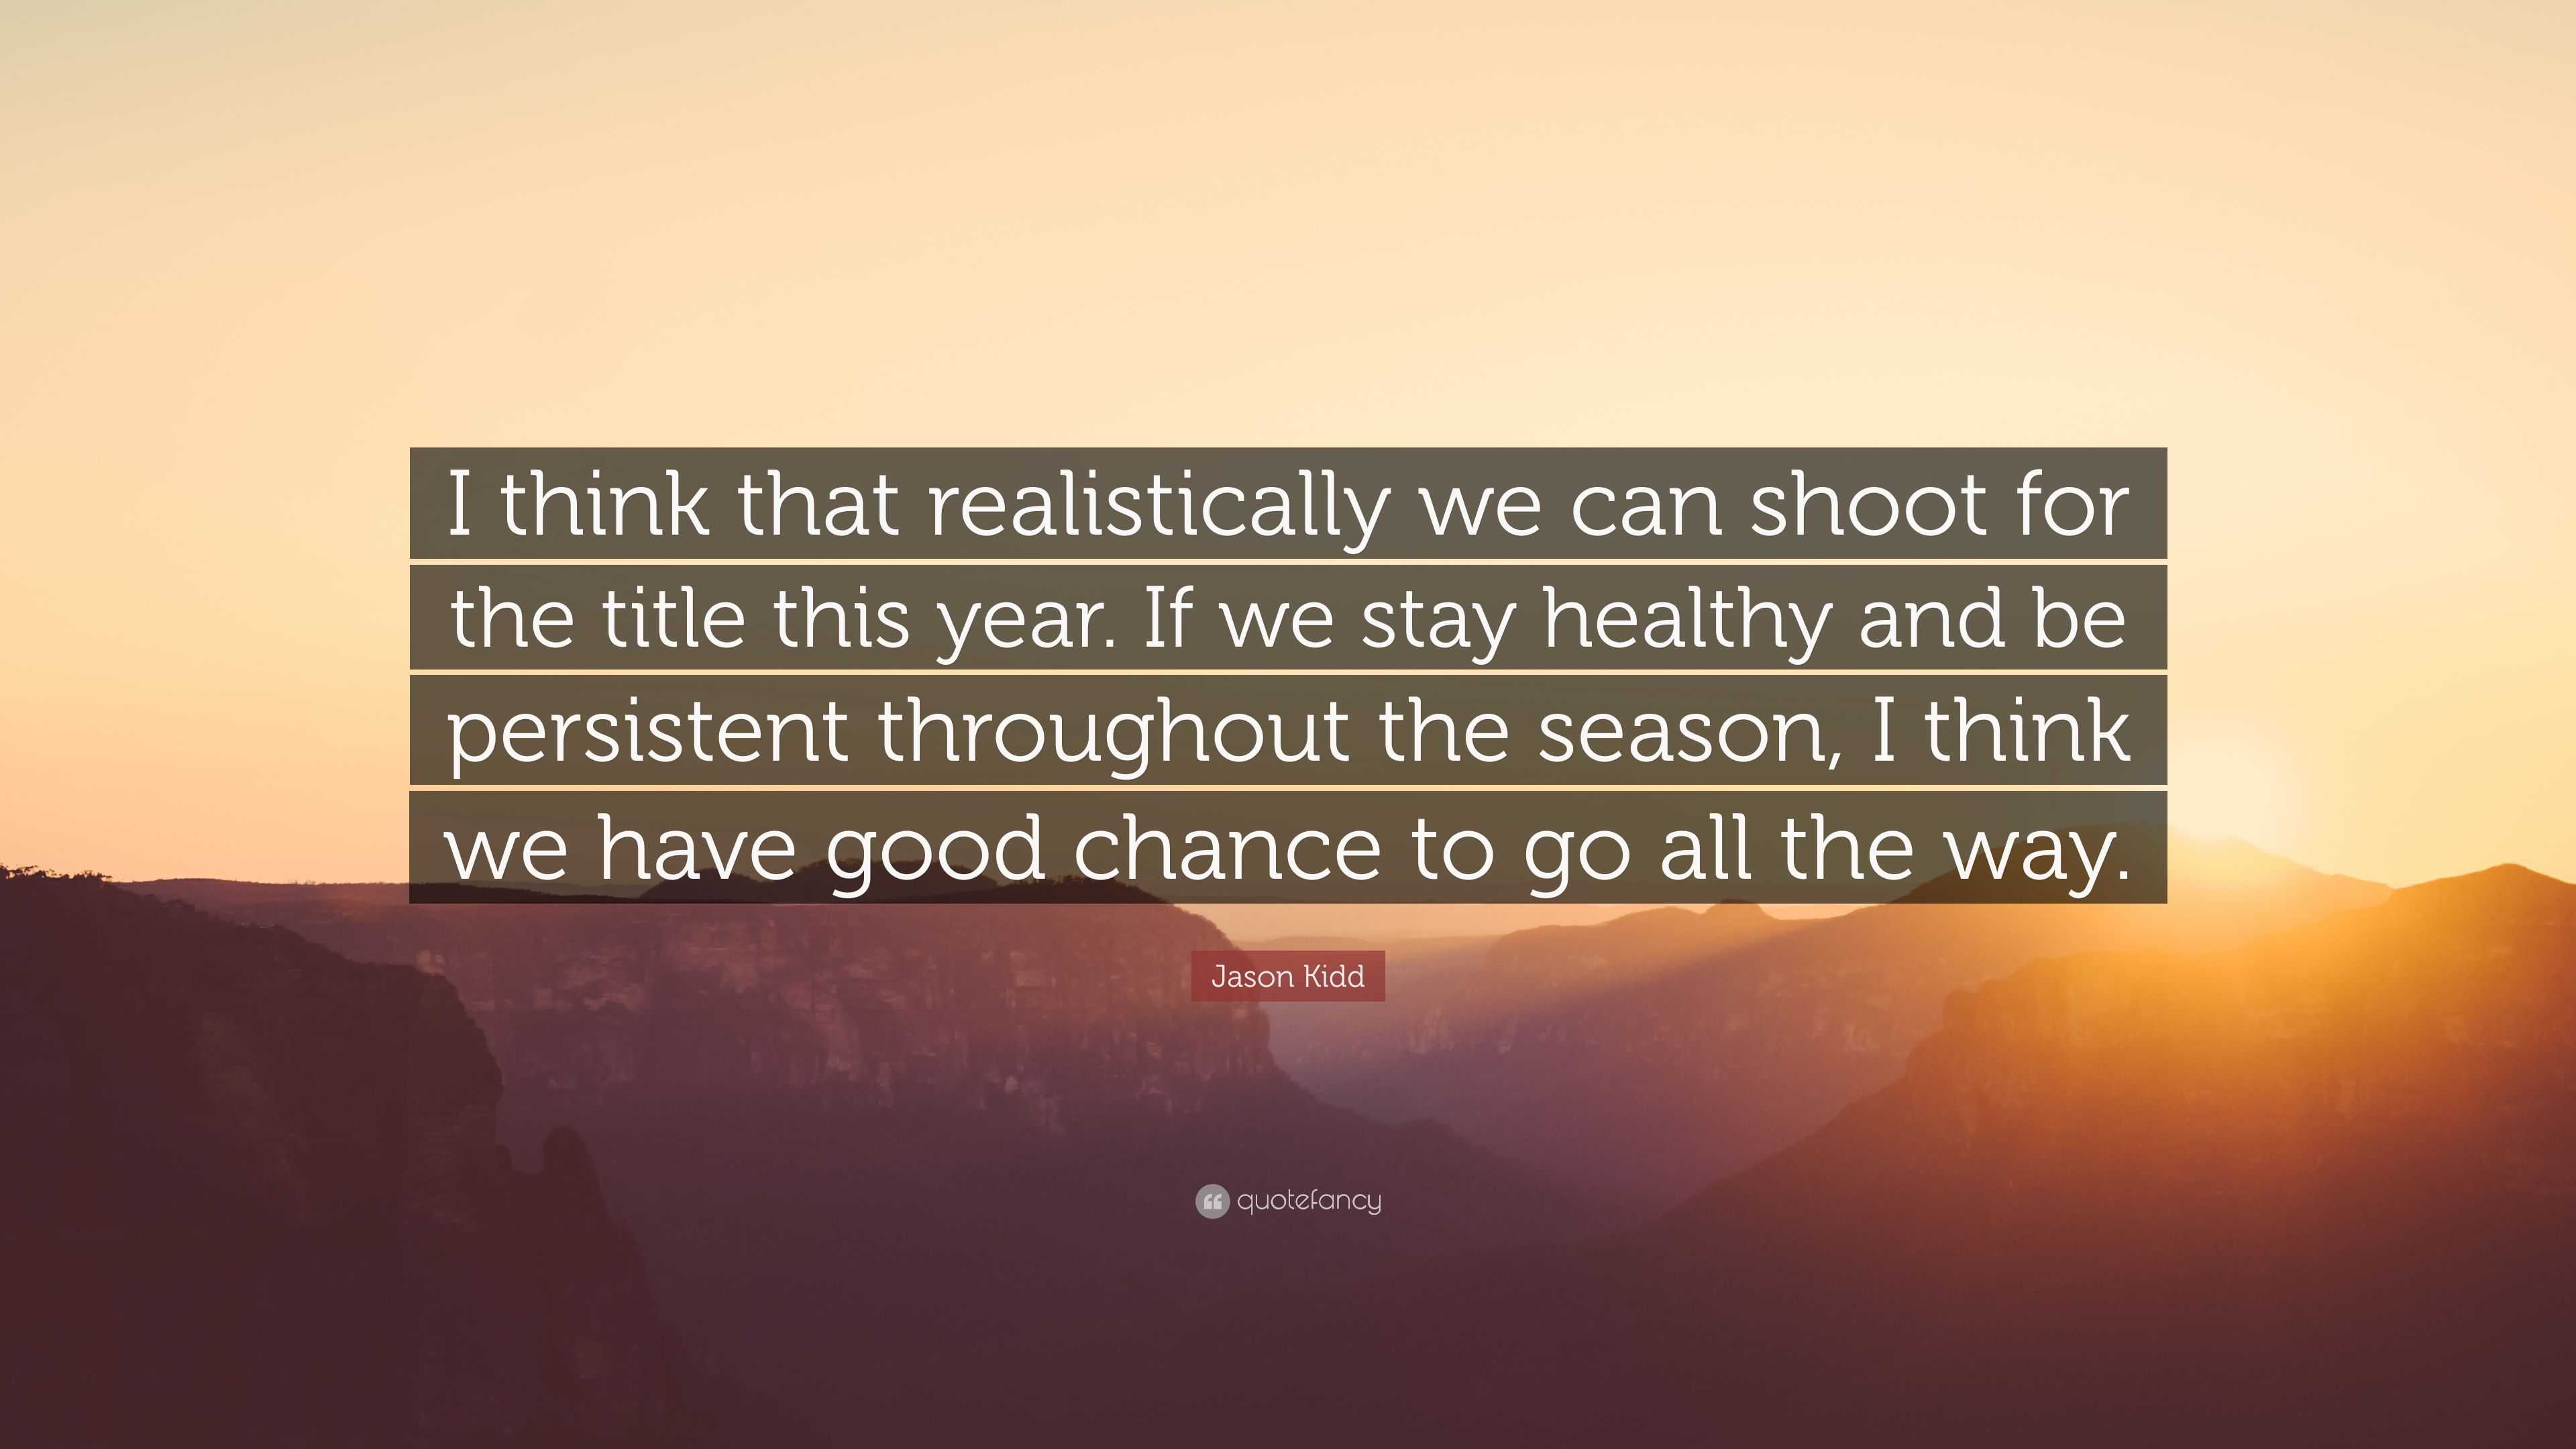 https://quotefancy.com/media/wallpaper/3840x2160/5191516-Jason-Kidd-Quote-I-think-that-realistically-we-can-shoot-for-the.jpg